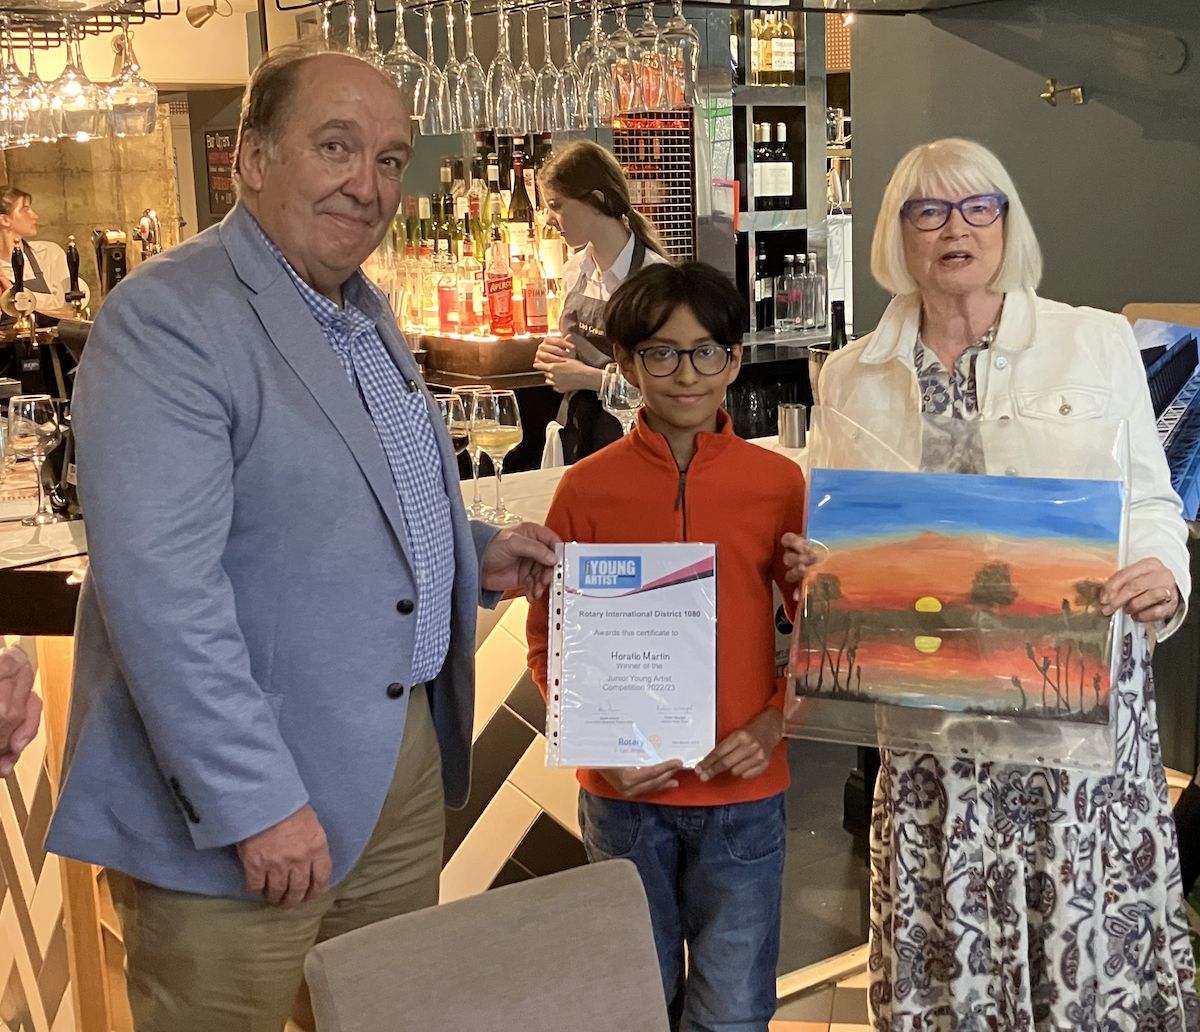 Young Artist Competition 2023 - 